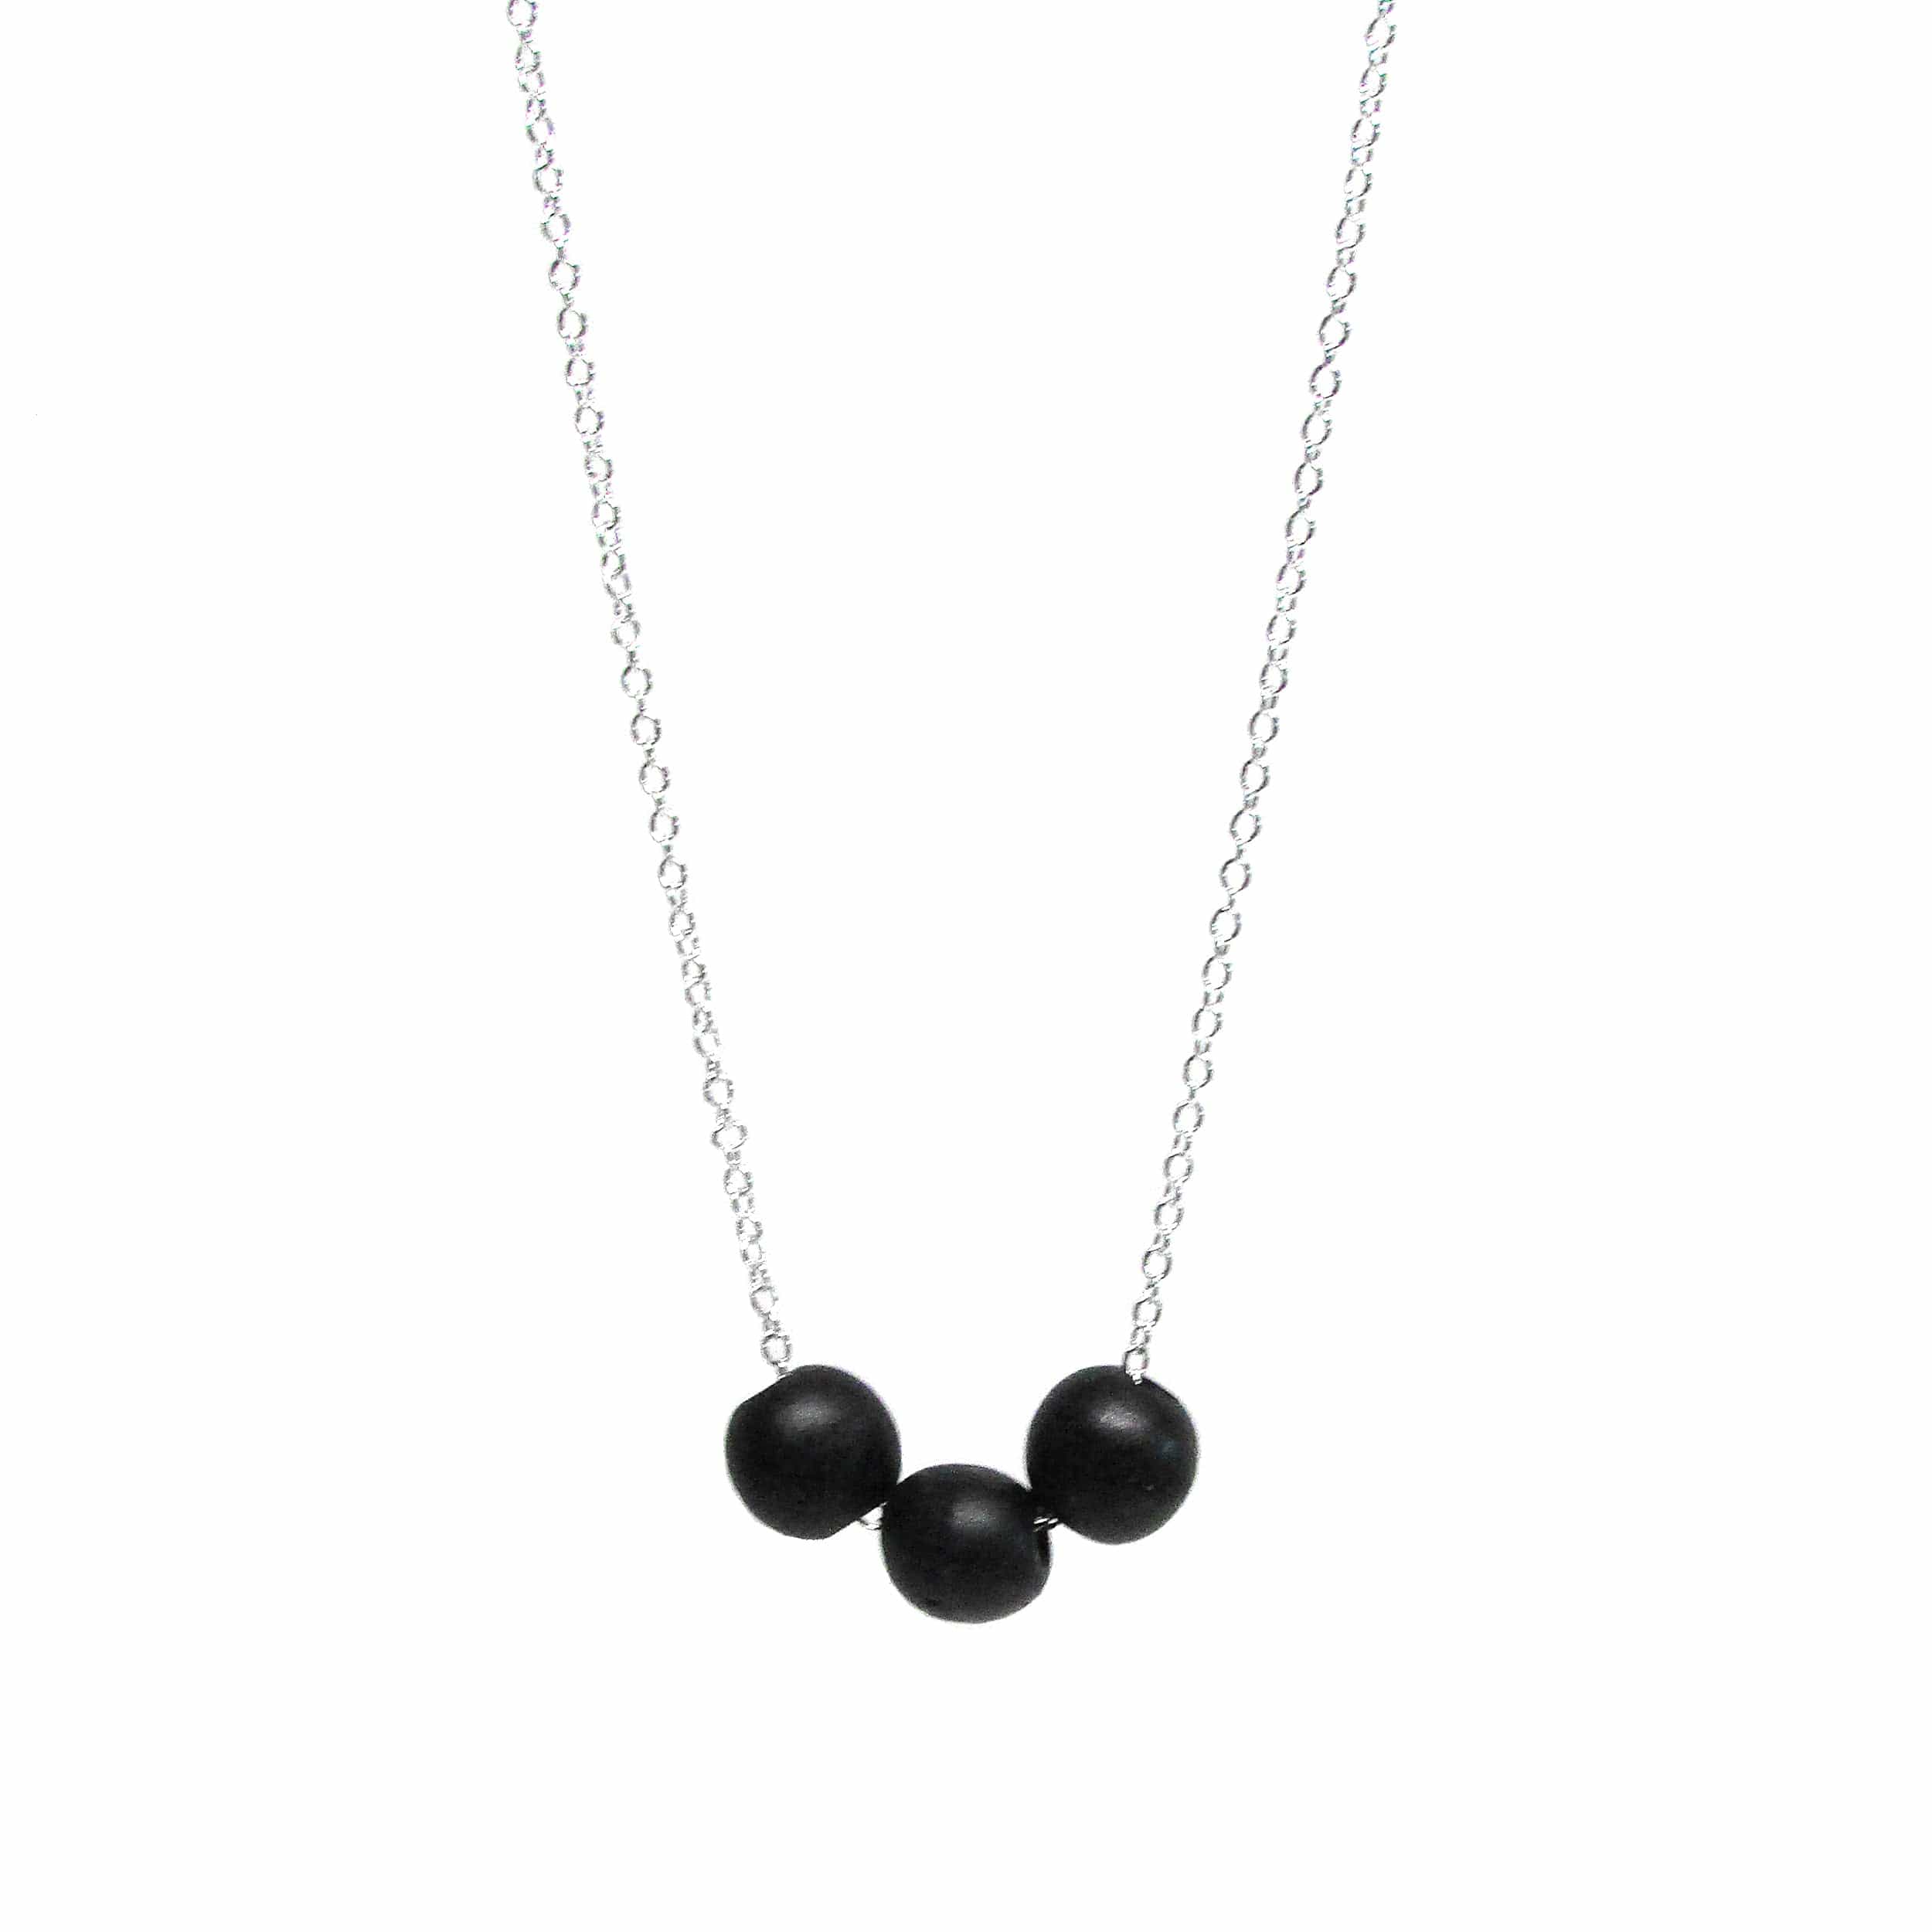 Three Wishes Wood Beads Minimalist Silver Chain 18" Ladies Necklace Necklaces A Moment Of Now Women’s Boutique Clothing Online Lifestyle Store